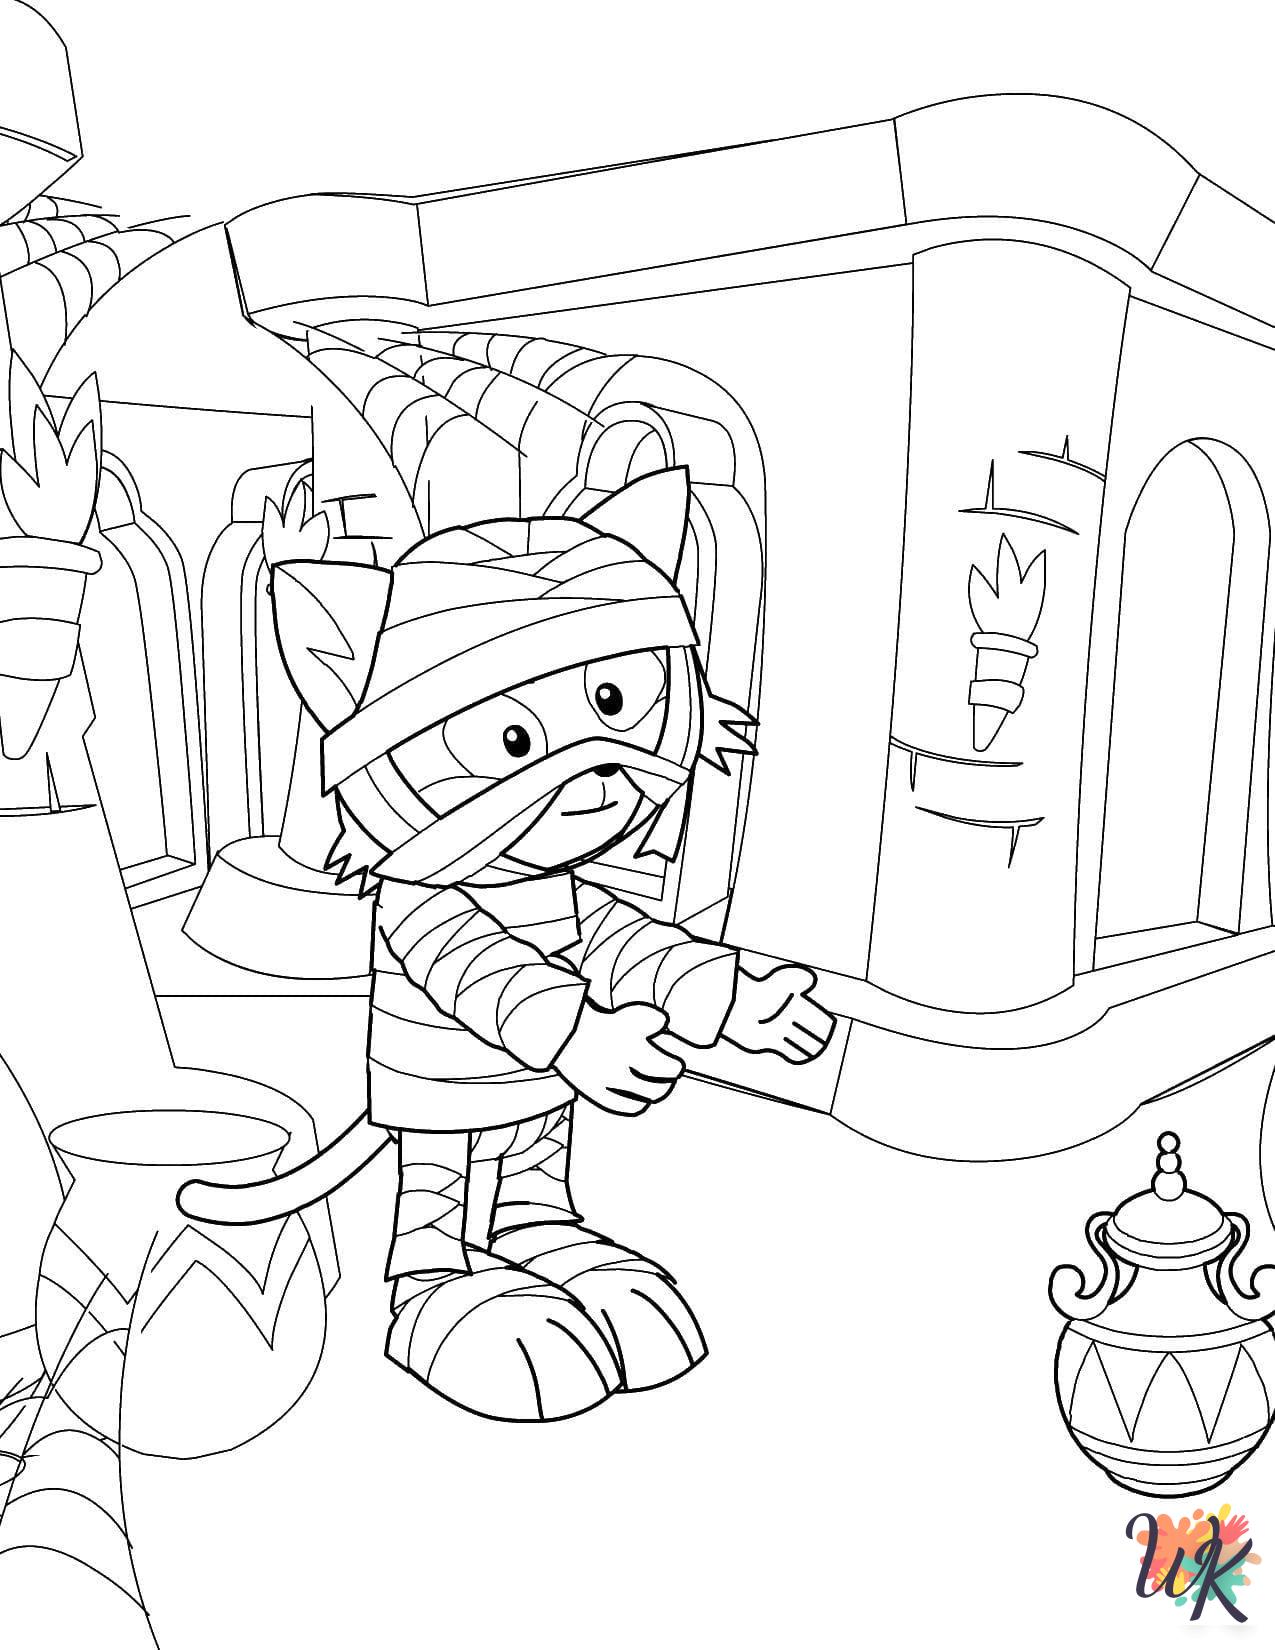 Mummy coloring pages free printable